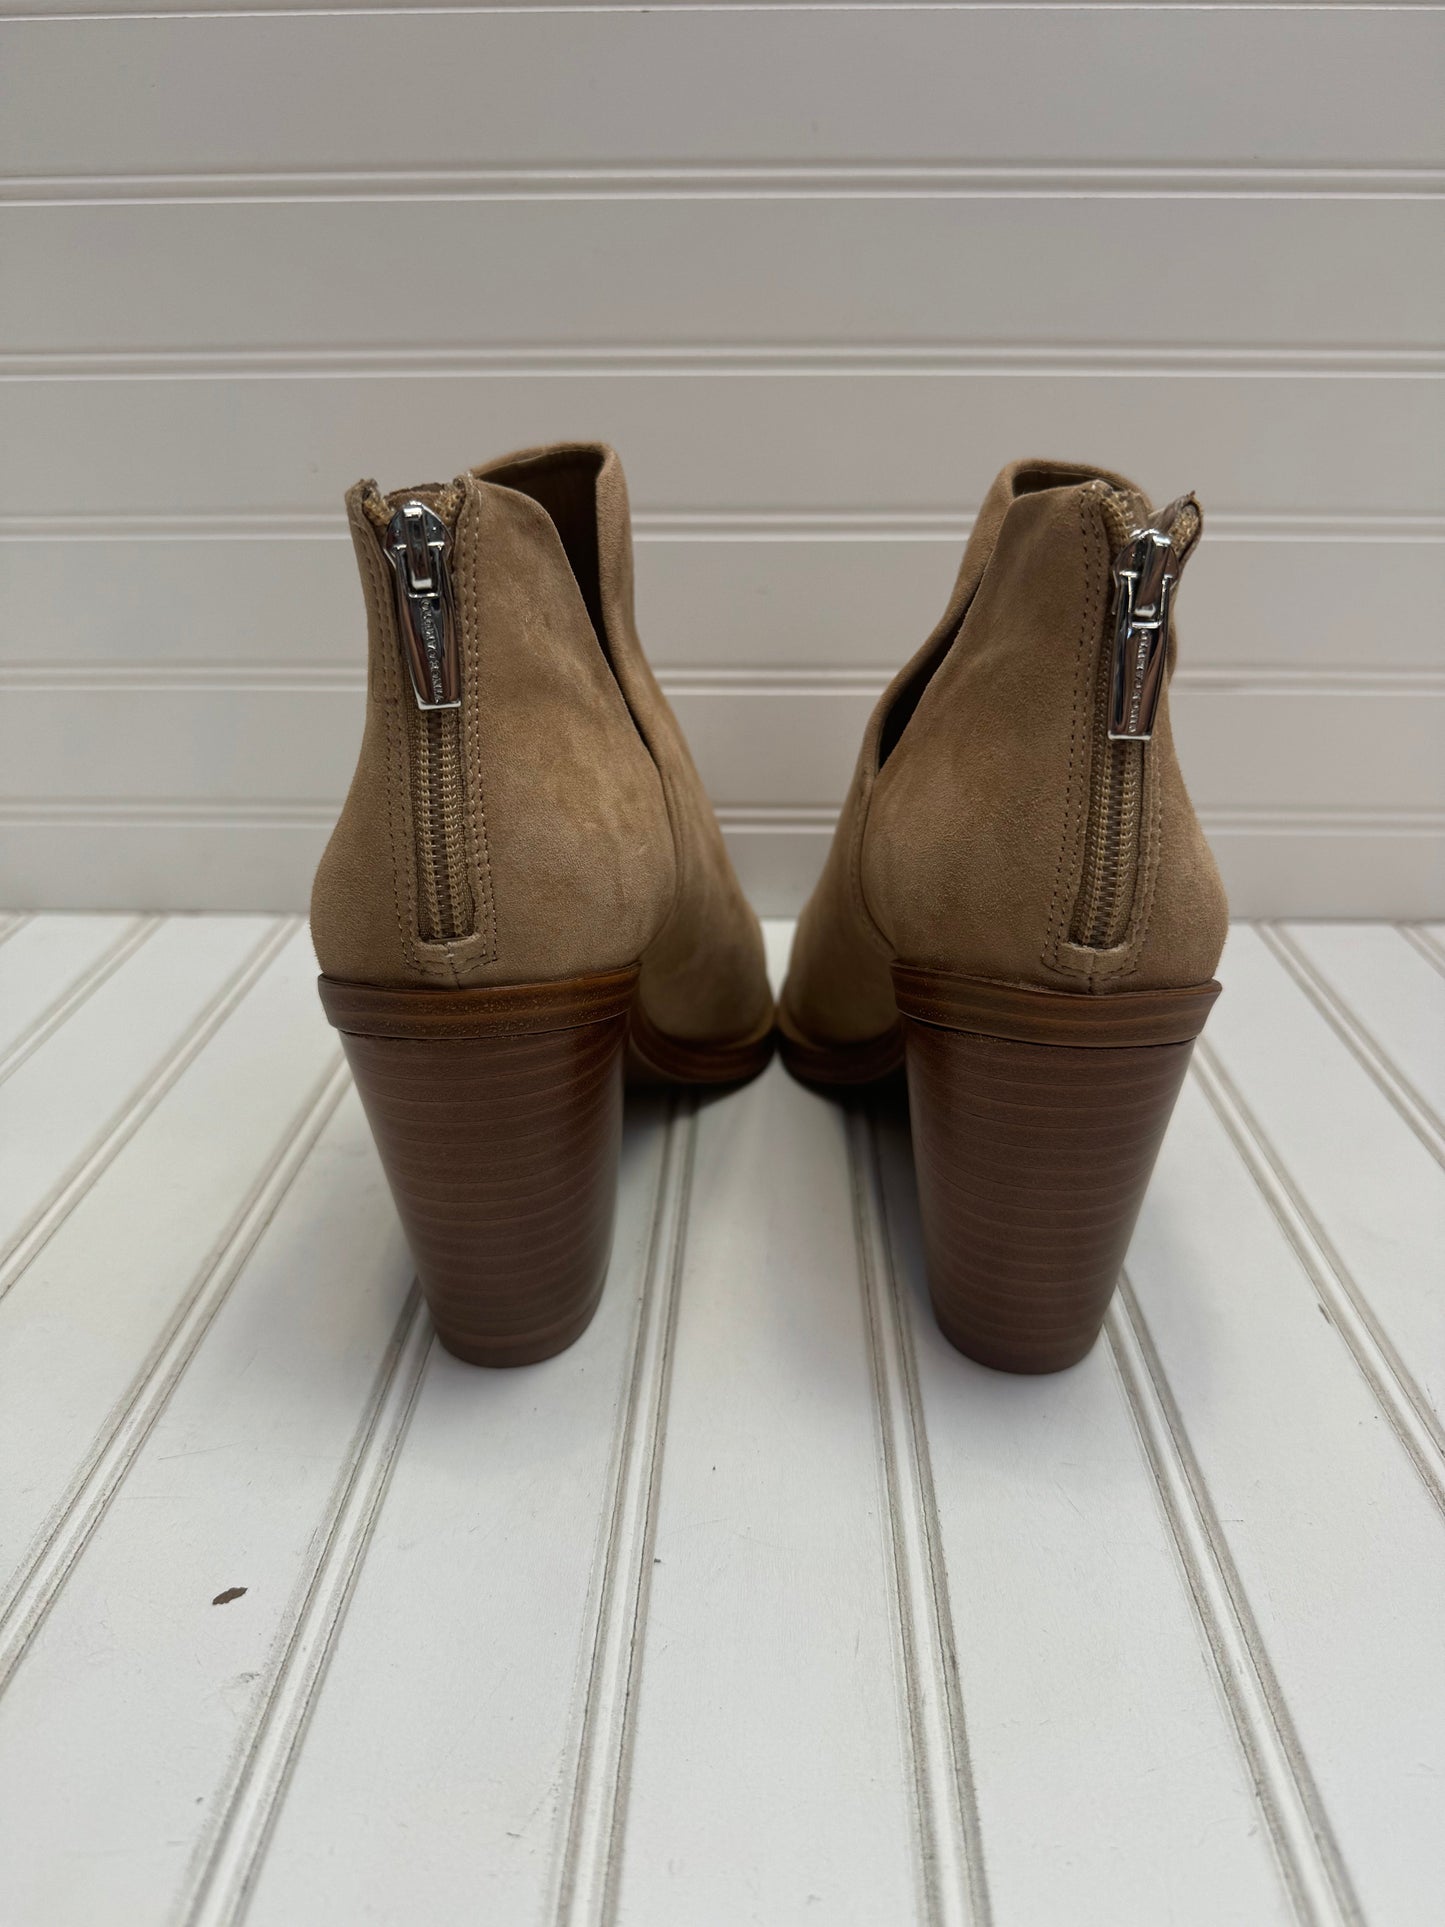 Tan Boots Ankle Heels Vince Camuto, Size 8.5